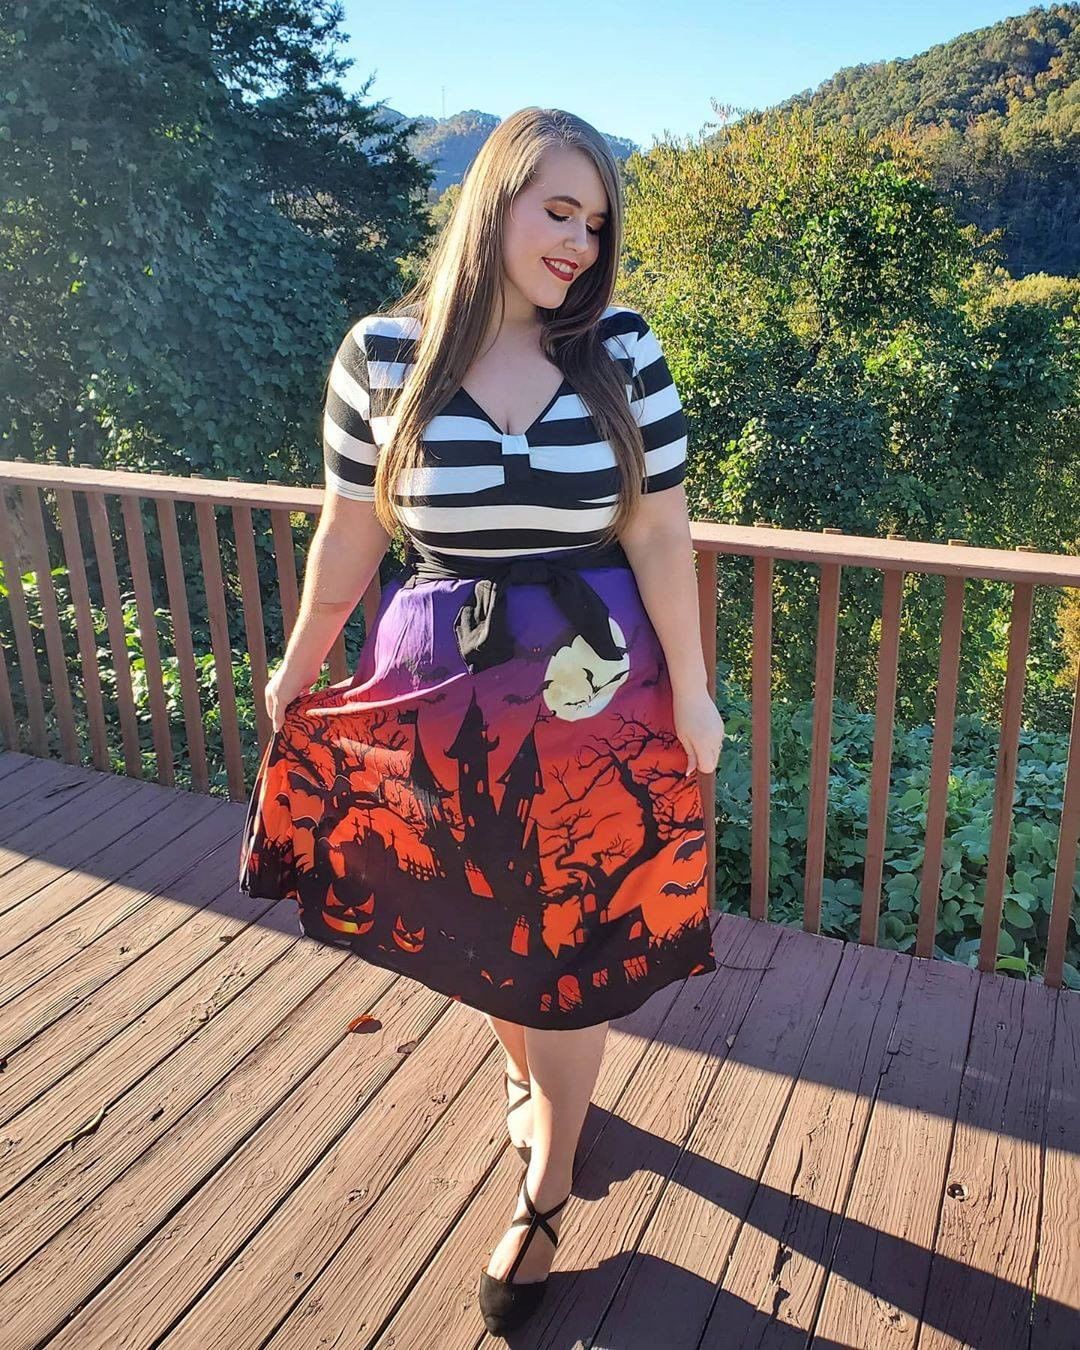 Dresslily - 👻 "It's easy to get in the spooky season mood when you can wear fun looks like this one"
👉Pict by @hollylindsey_ 
🌟Search: "469395302"
🍂CODE: IG2020 [Get 22% off]
#dresslily